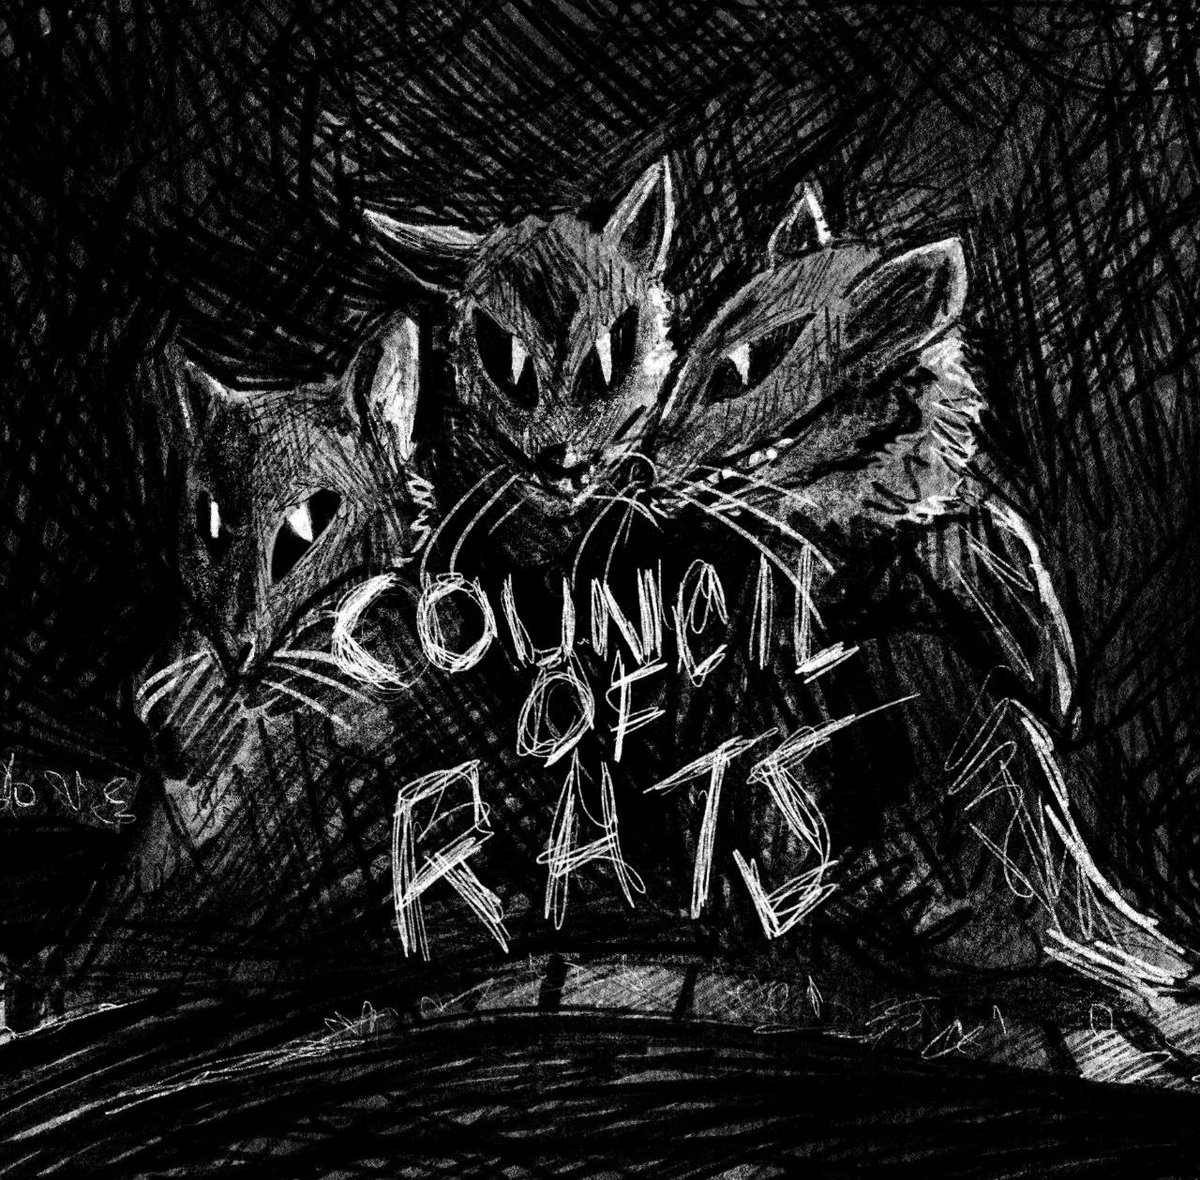 You haven't heard the single The Council of Rats I released with Suburban Bicycle Gang @bicyclegang yesterday. Give it a whirl. It's available on all streaming platforms as of yesterday!